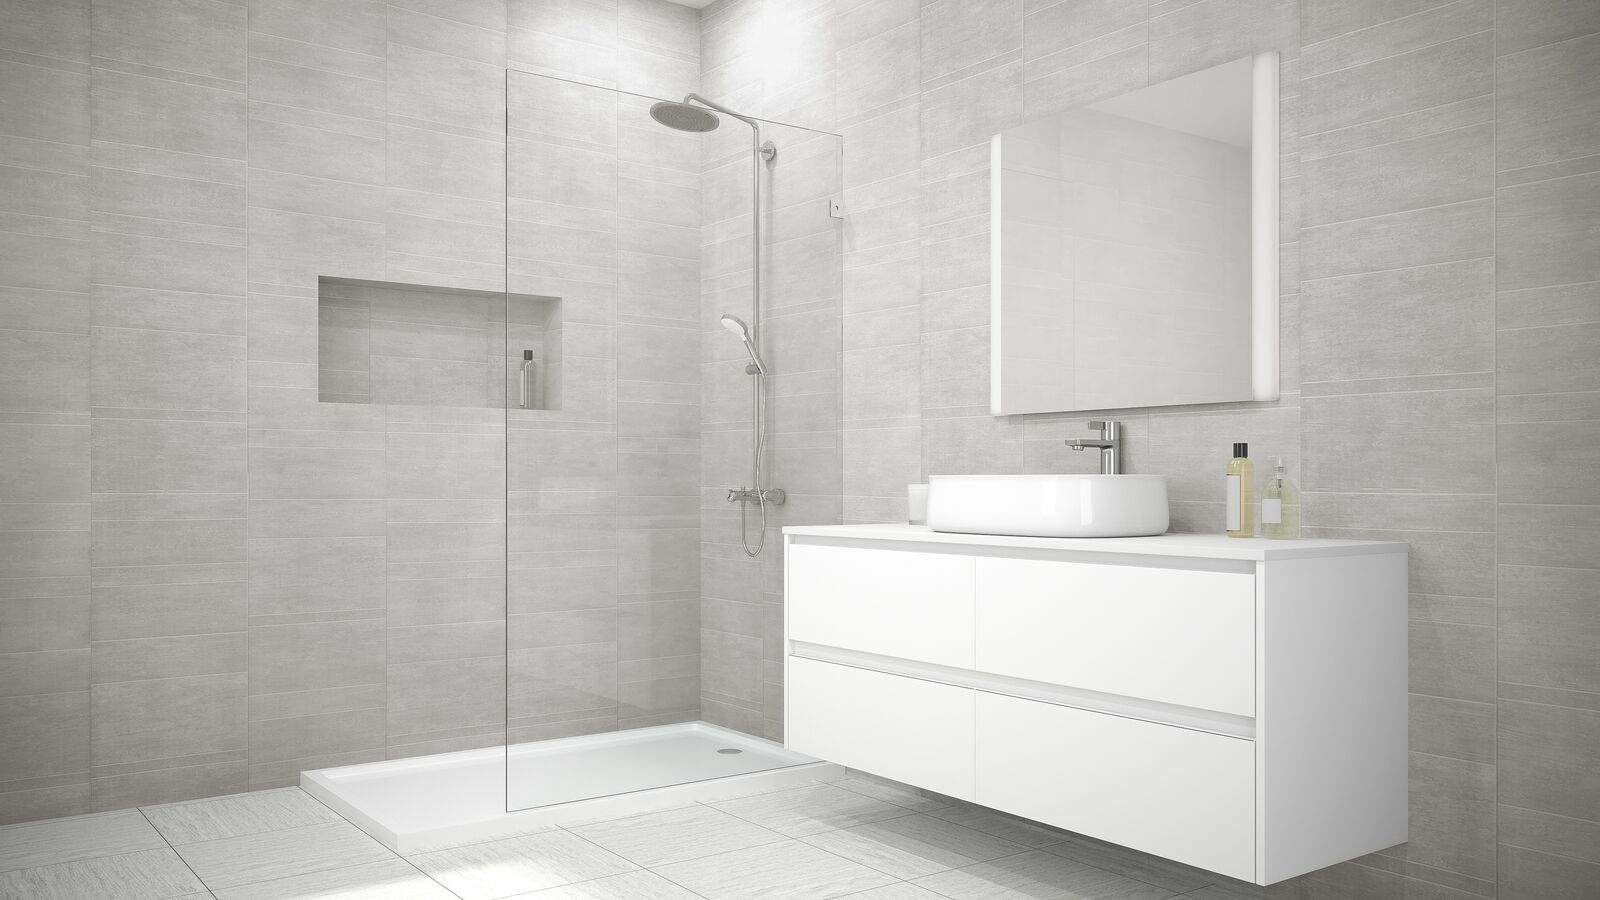 Our Standard moonstone tile wall panel showcased in a freestanding modern bathroom setting.